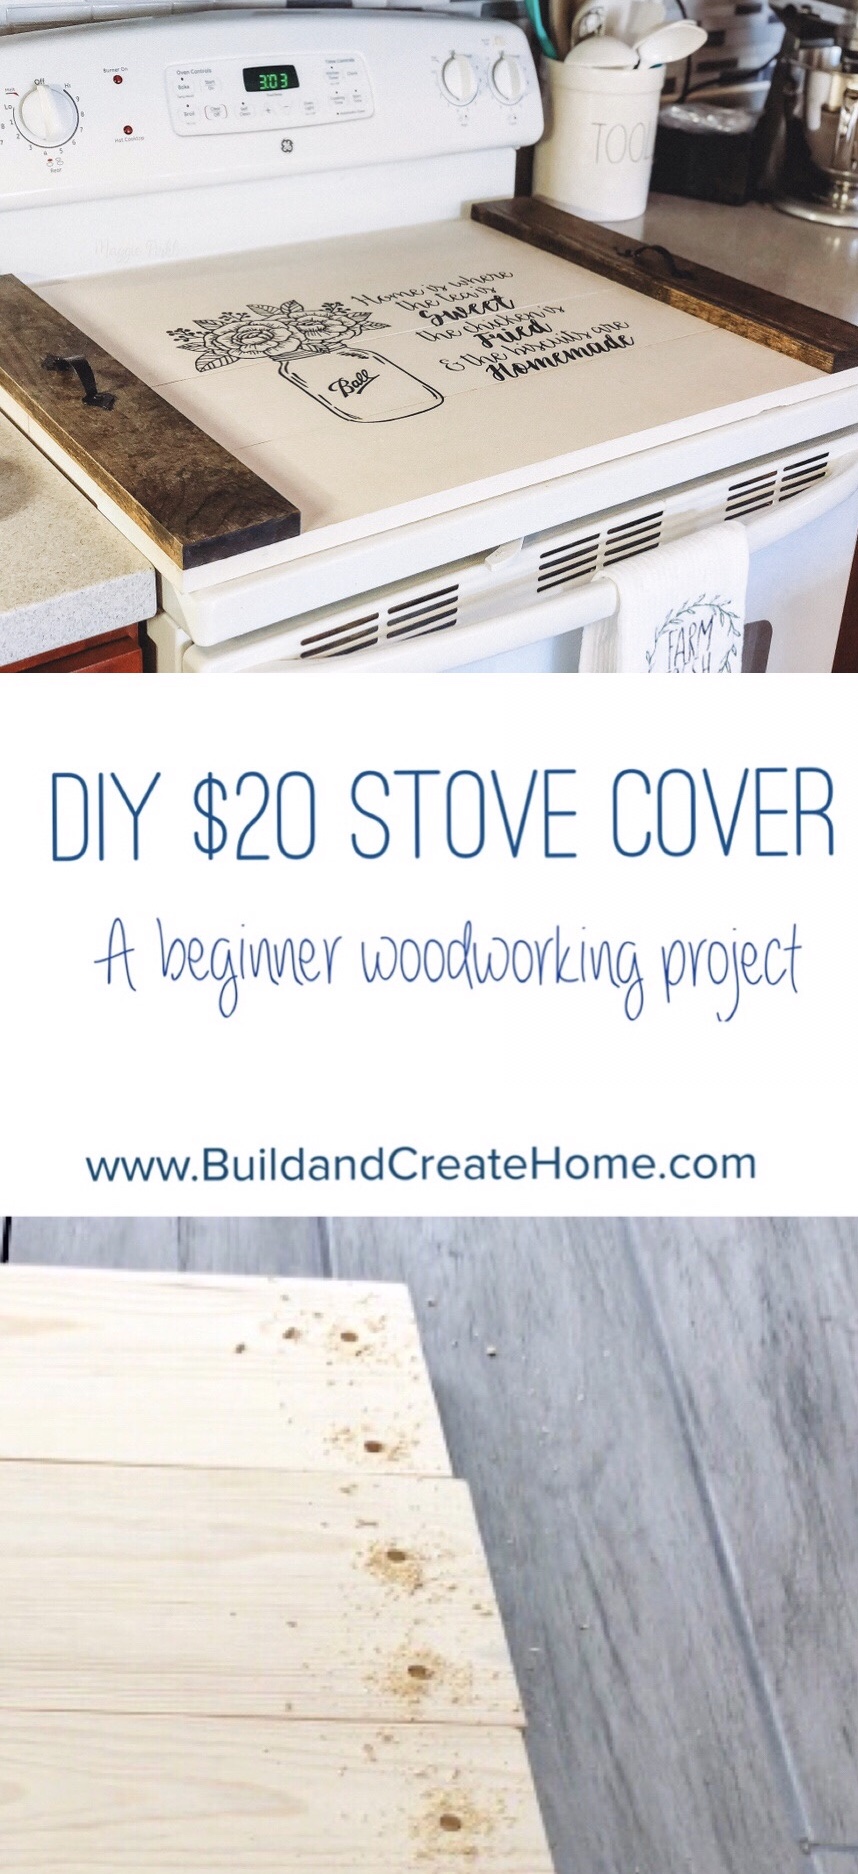 Diy Stove Cover Noodle Board, Wooden Stove Top Covers Diy